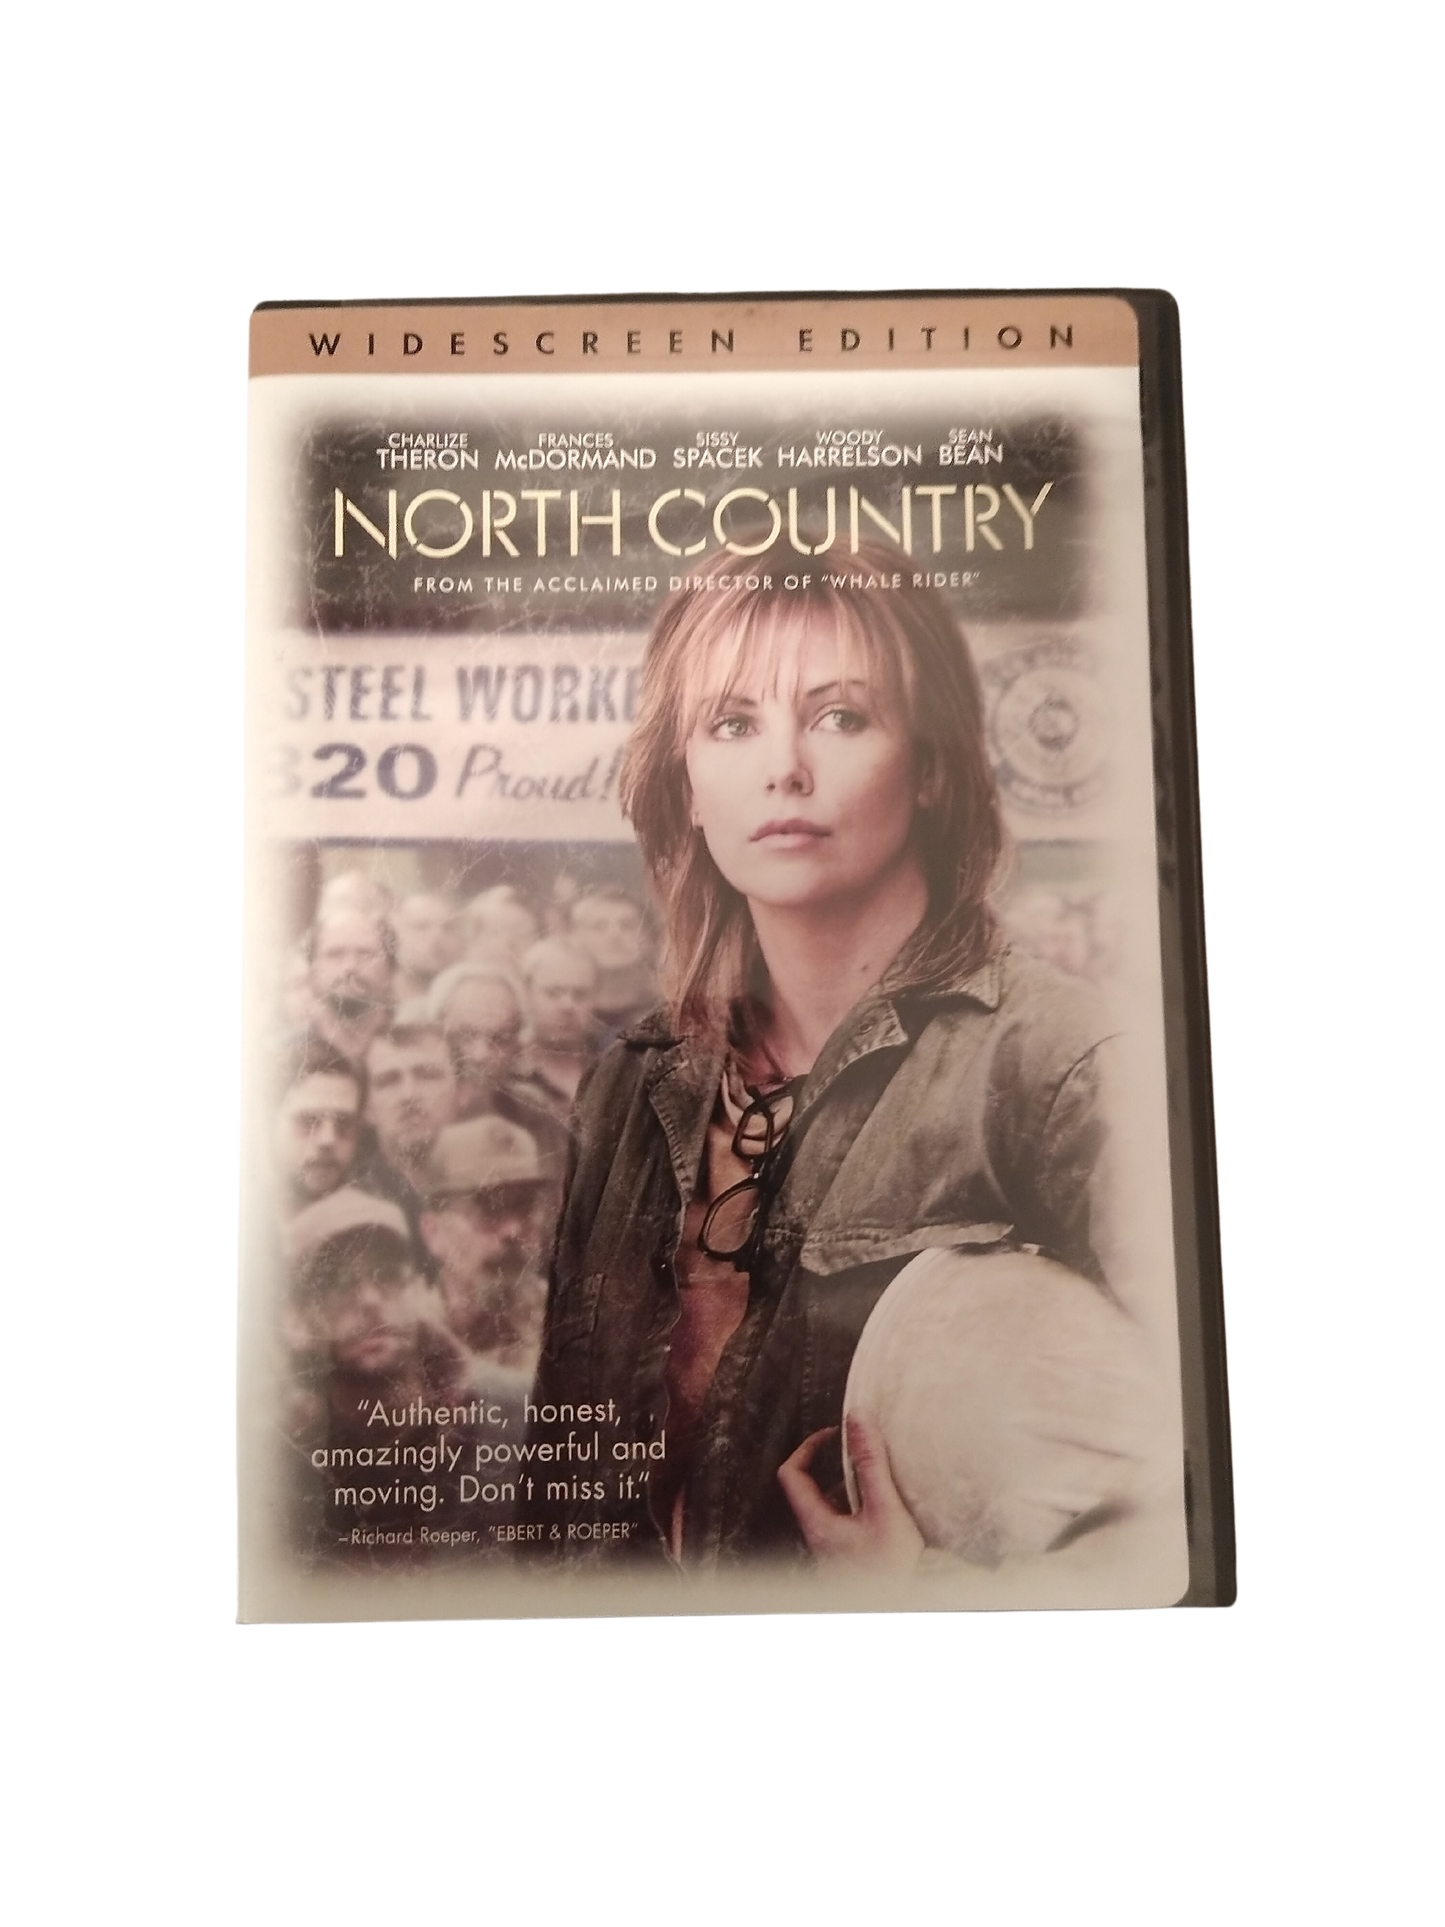 North Country Starring Charlize Theron - DVD